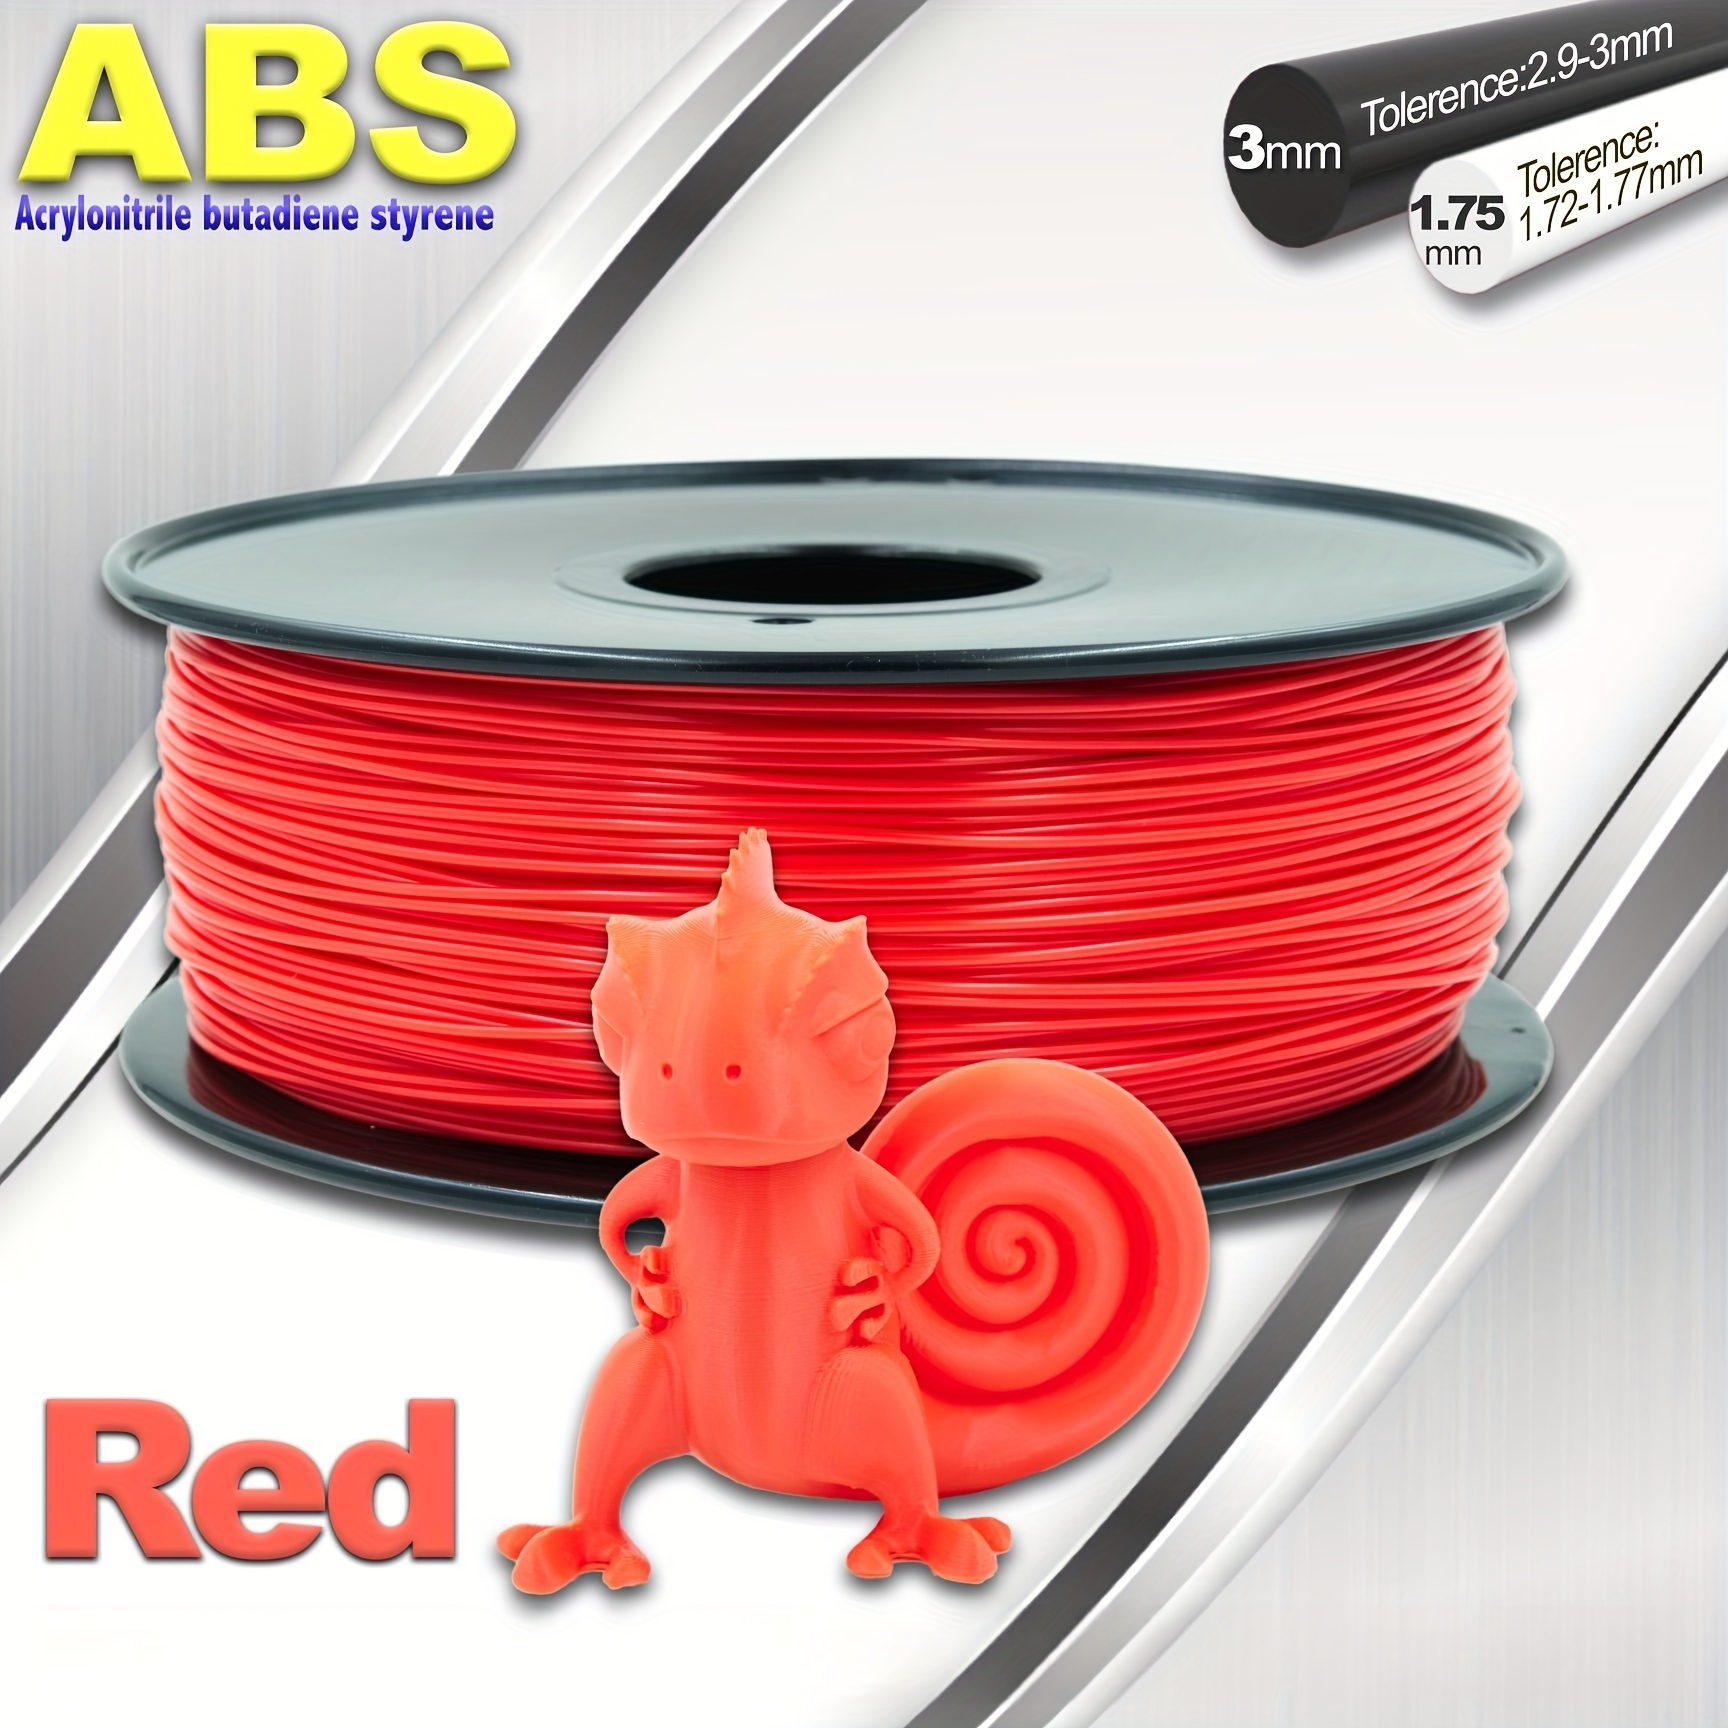 Tesseract Premium ABS 1.75mm 3D Printing Filament | Dimensional Accuracy  +/- 0.03mm | Compatible with Most FDM Printers | 1 KG 3D Printer Filament 